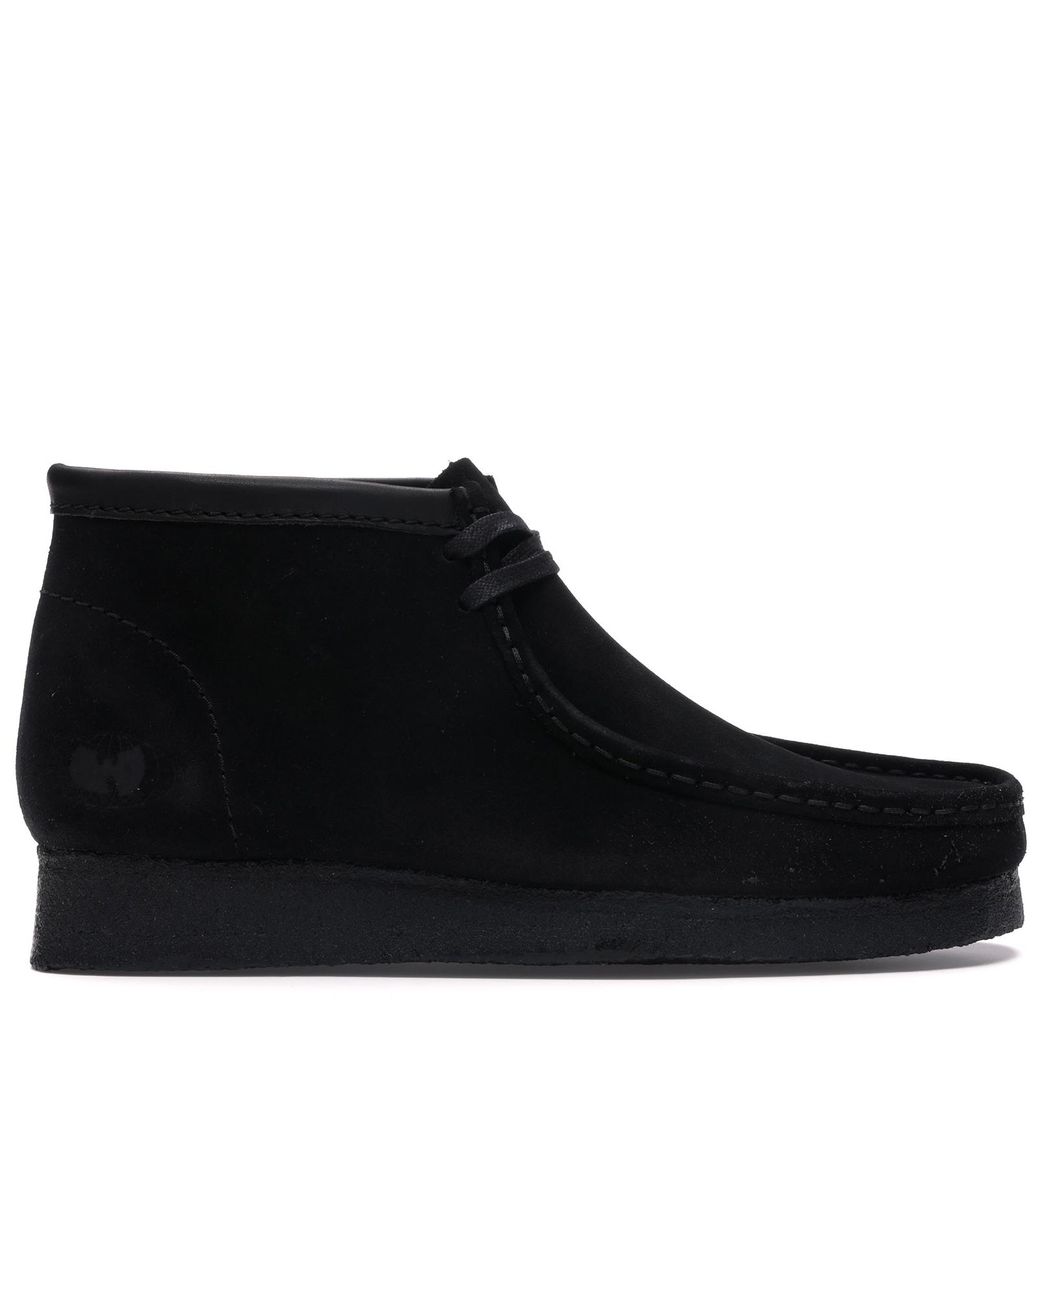 Clarks Wallabees Wu-tang 36 Chambers 25th Anniversary Black for Men - Lyst